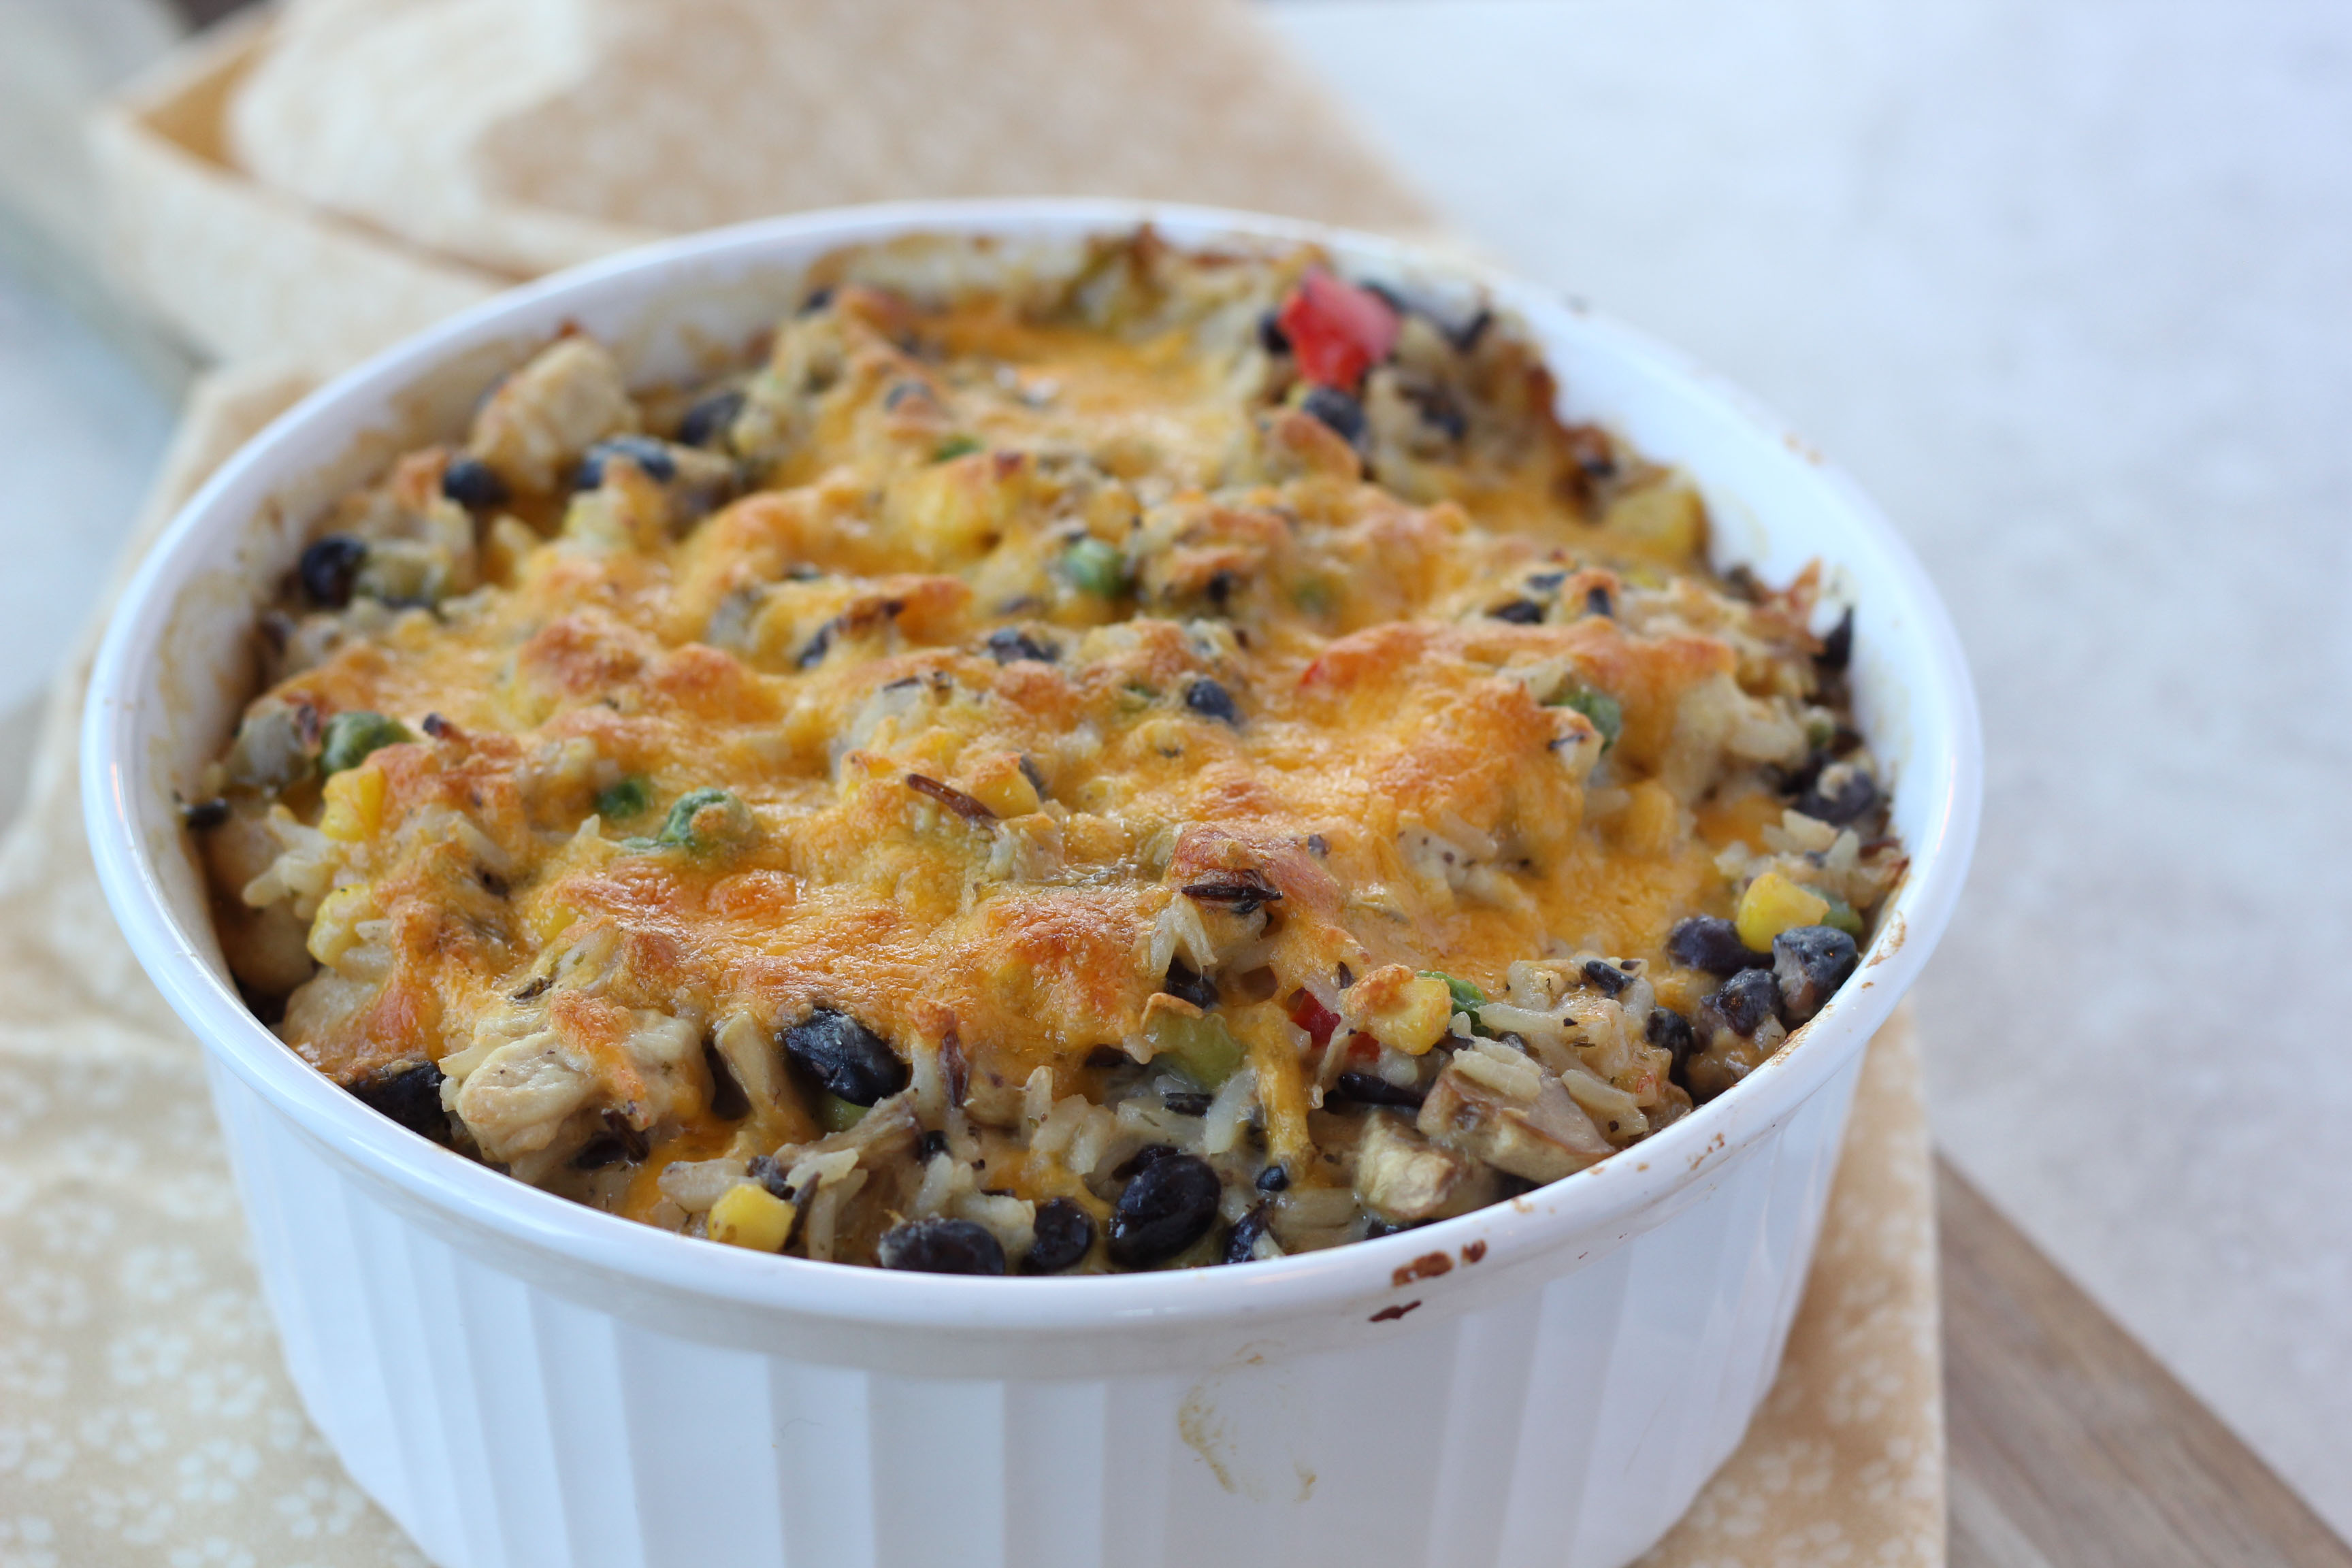 An image depicting the Black Beans and Mixed Rice Casserole recipe